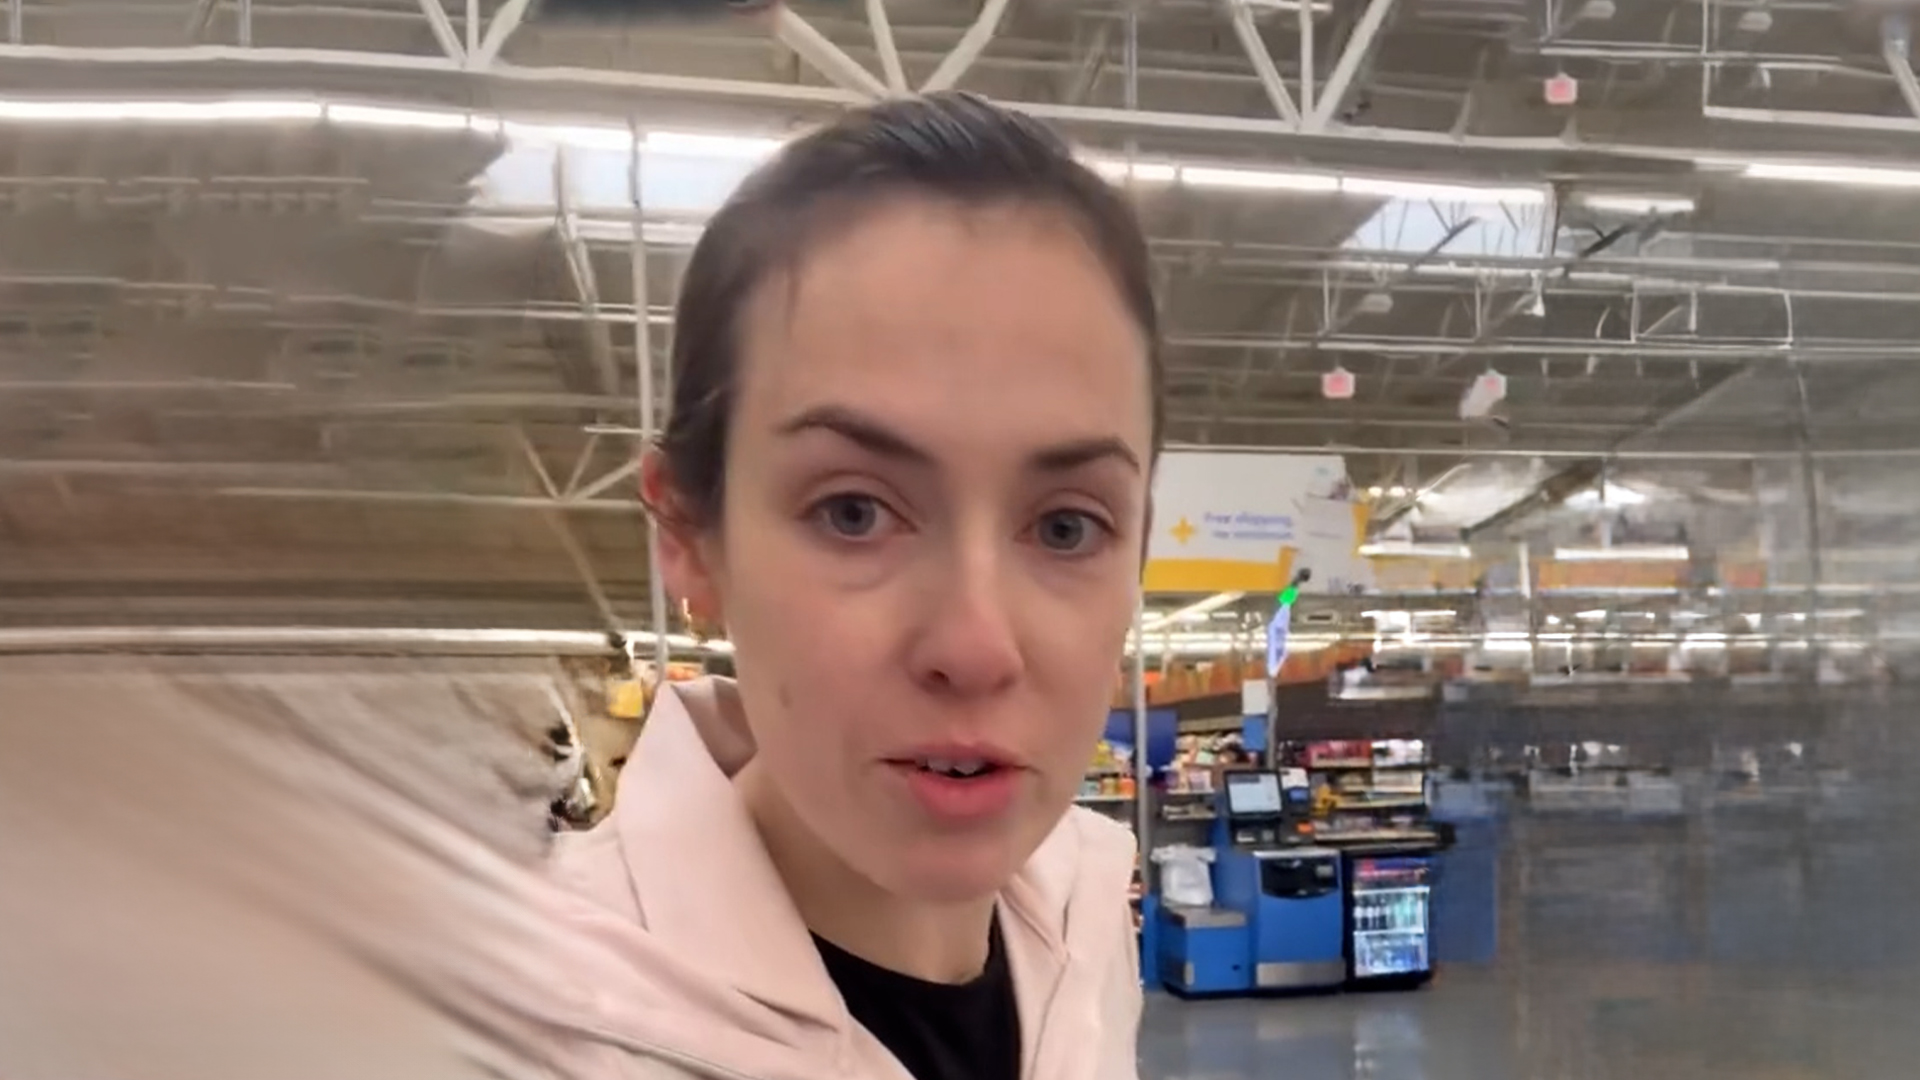 Walmart shopper’s self-checkout meltdown over bagging issue goes viral – breaking rule or just frustrated?